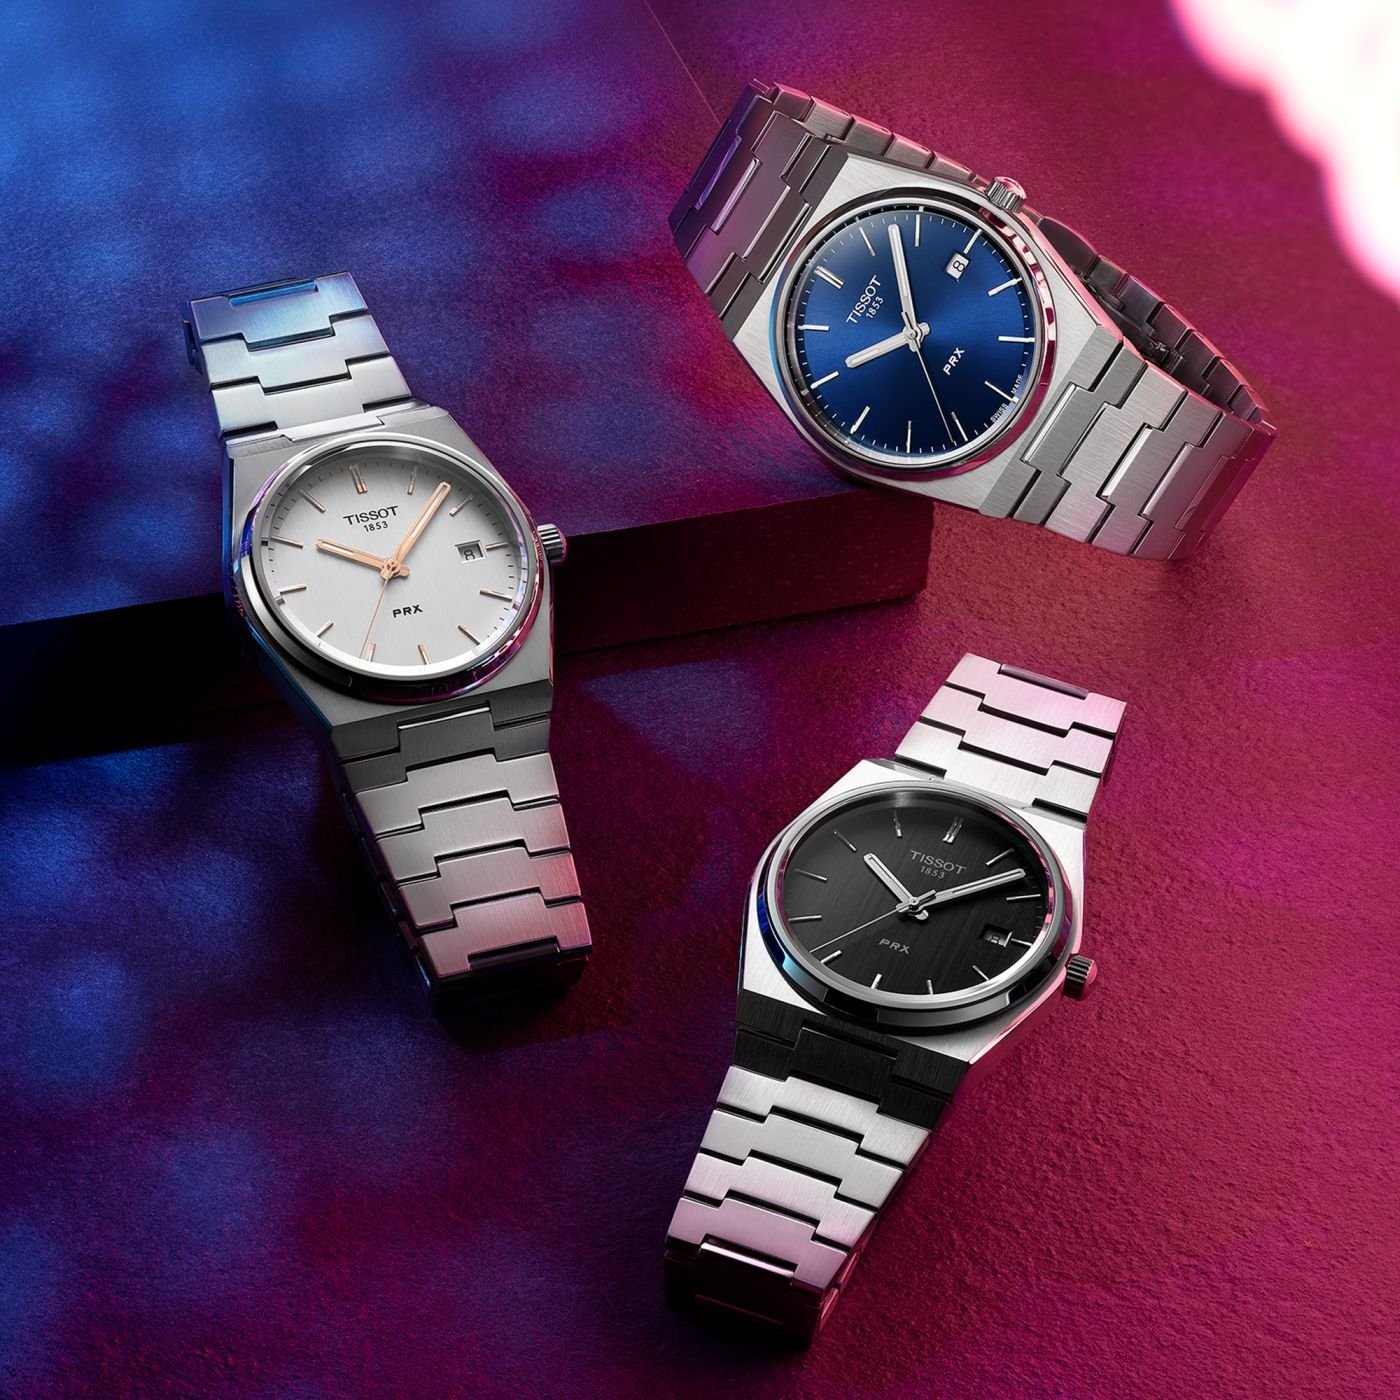 Introducing Tissot's new versions of the PRX